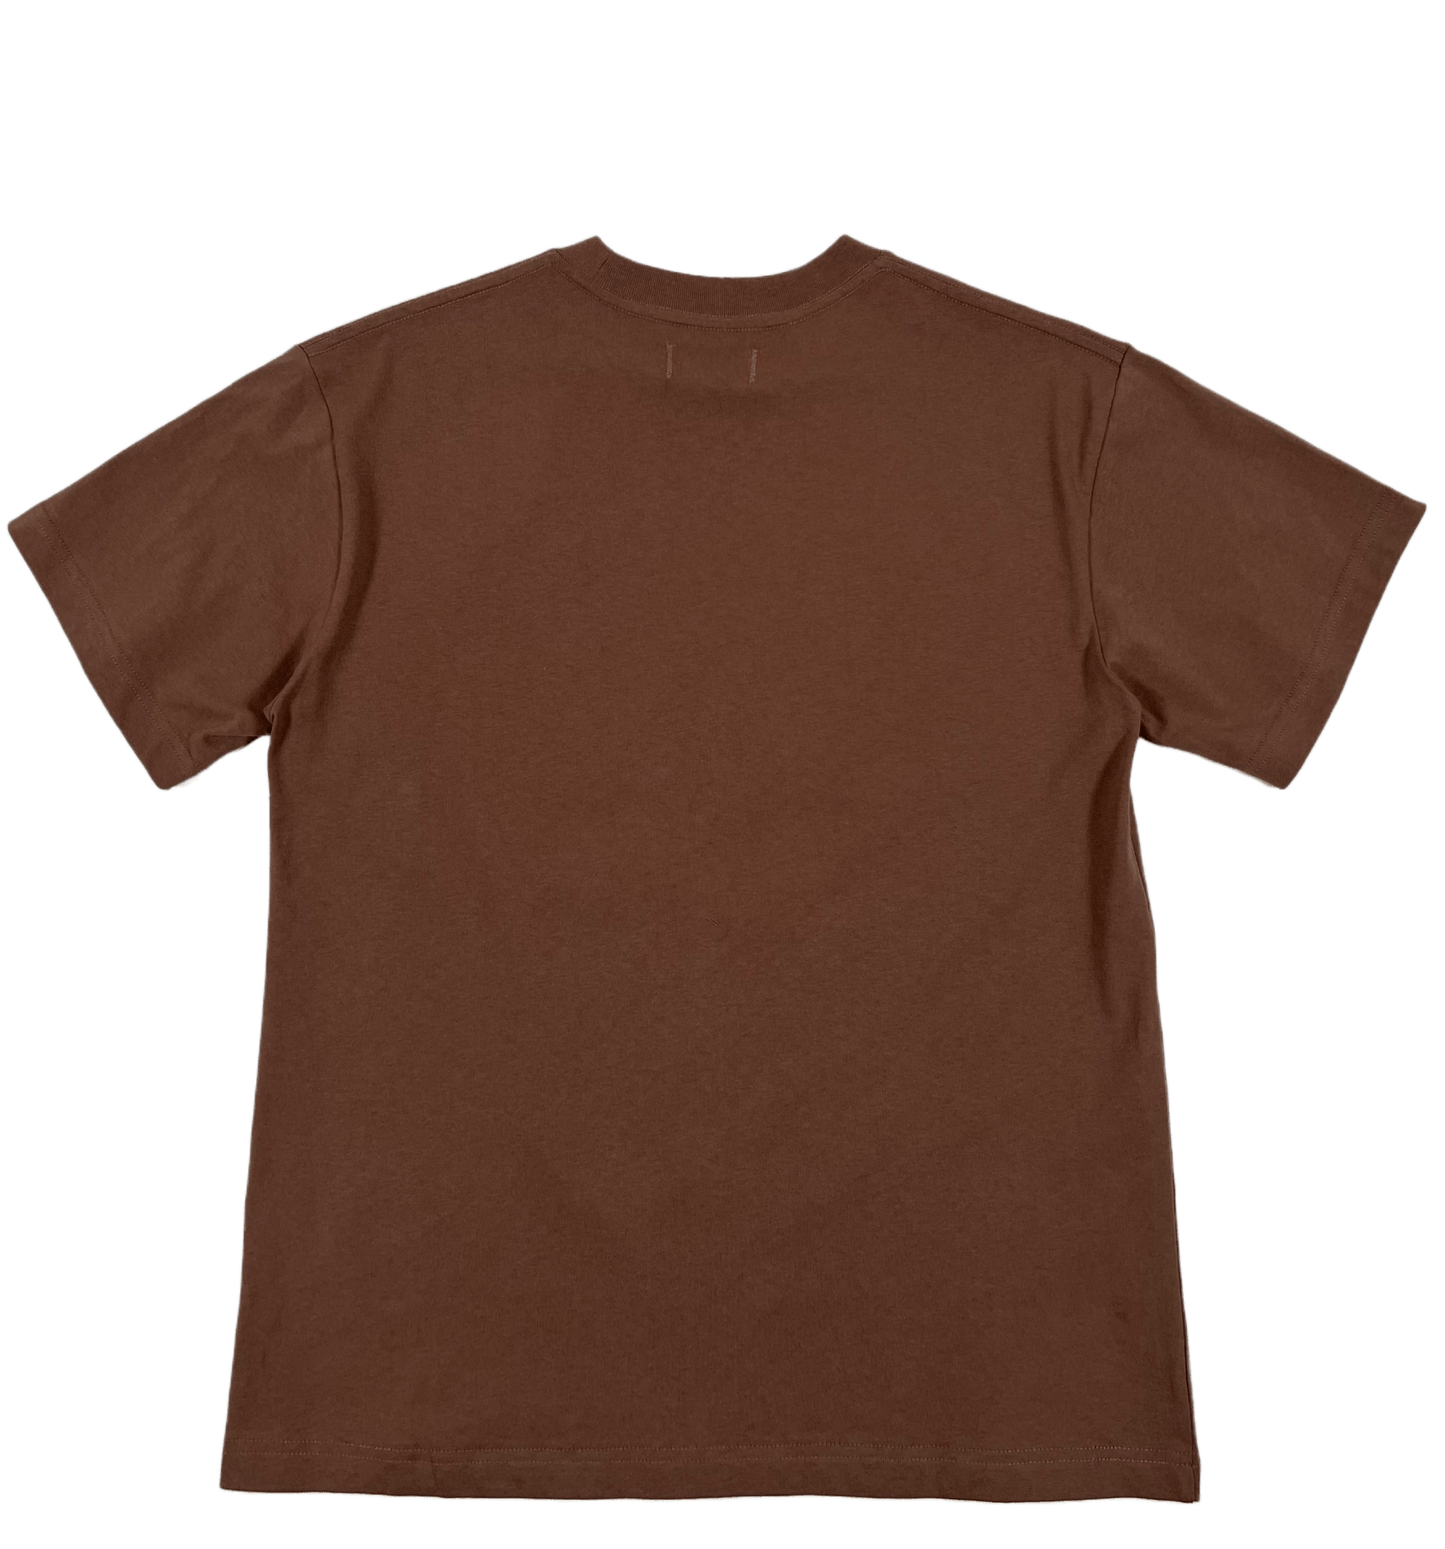 Probus HONOR THE GIFT C-FALL OUR BLOCK S/S TEE BROWN S